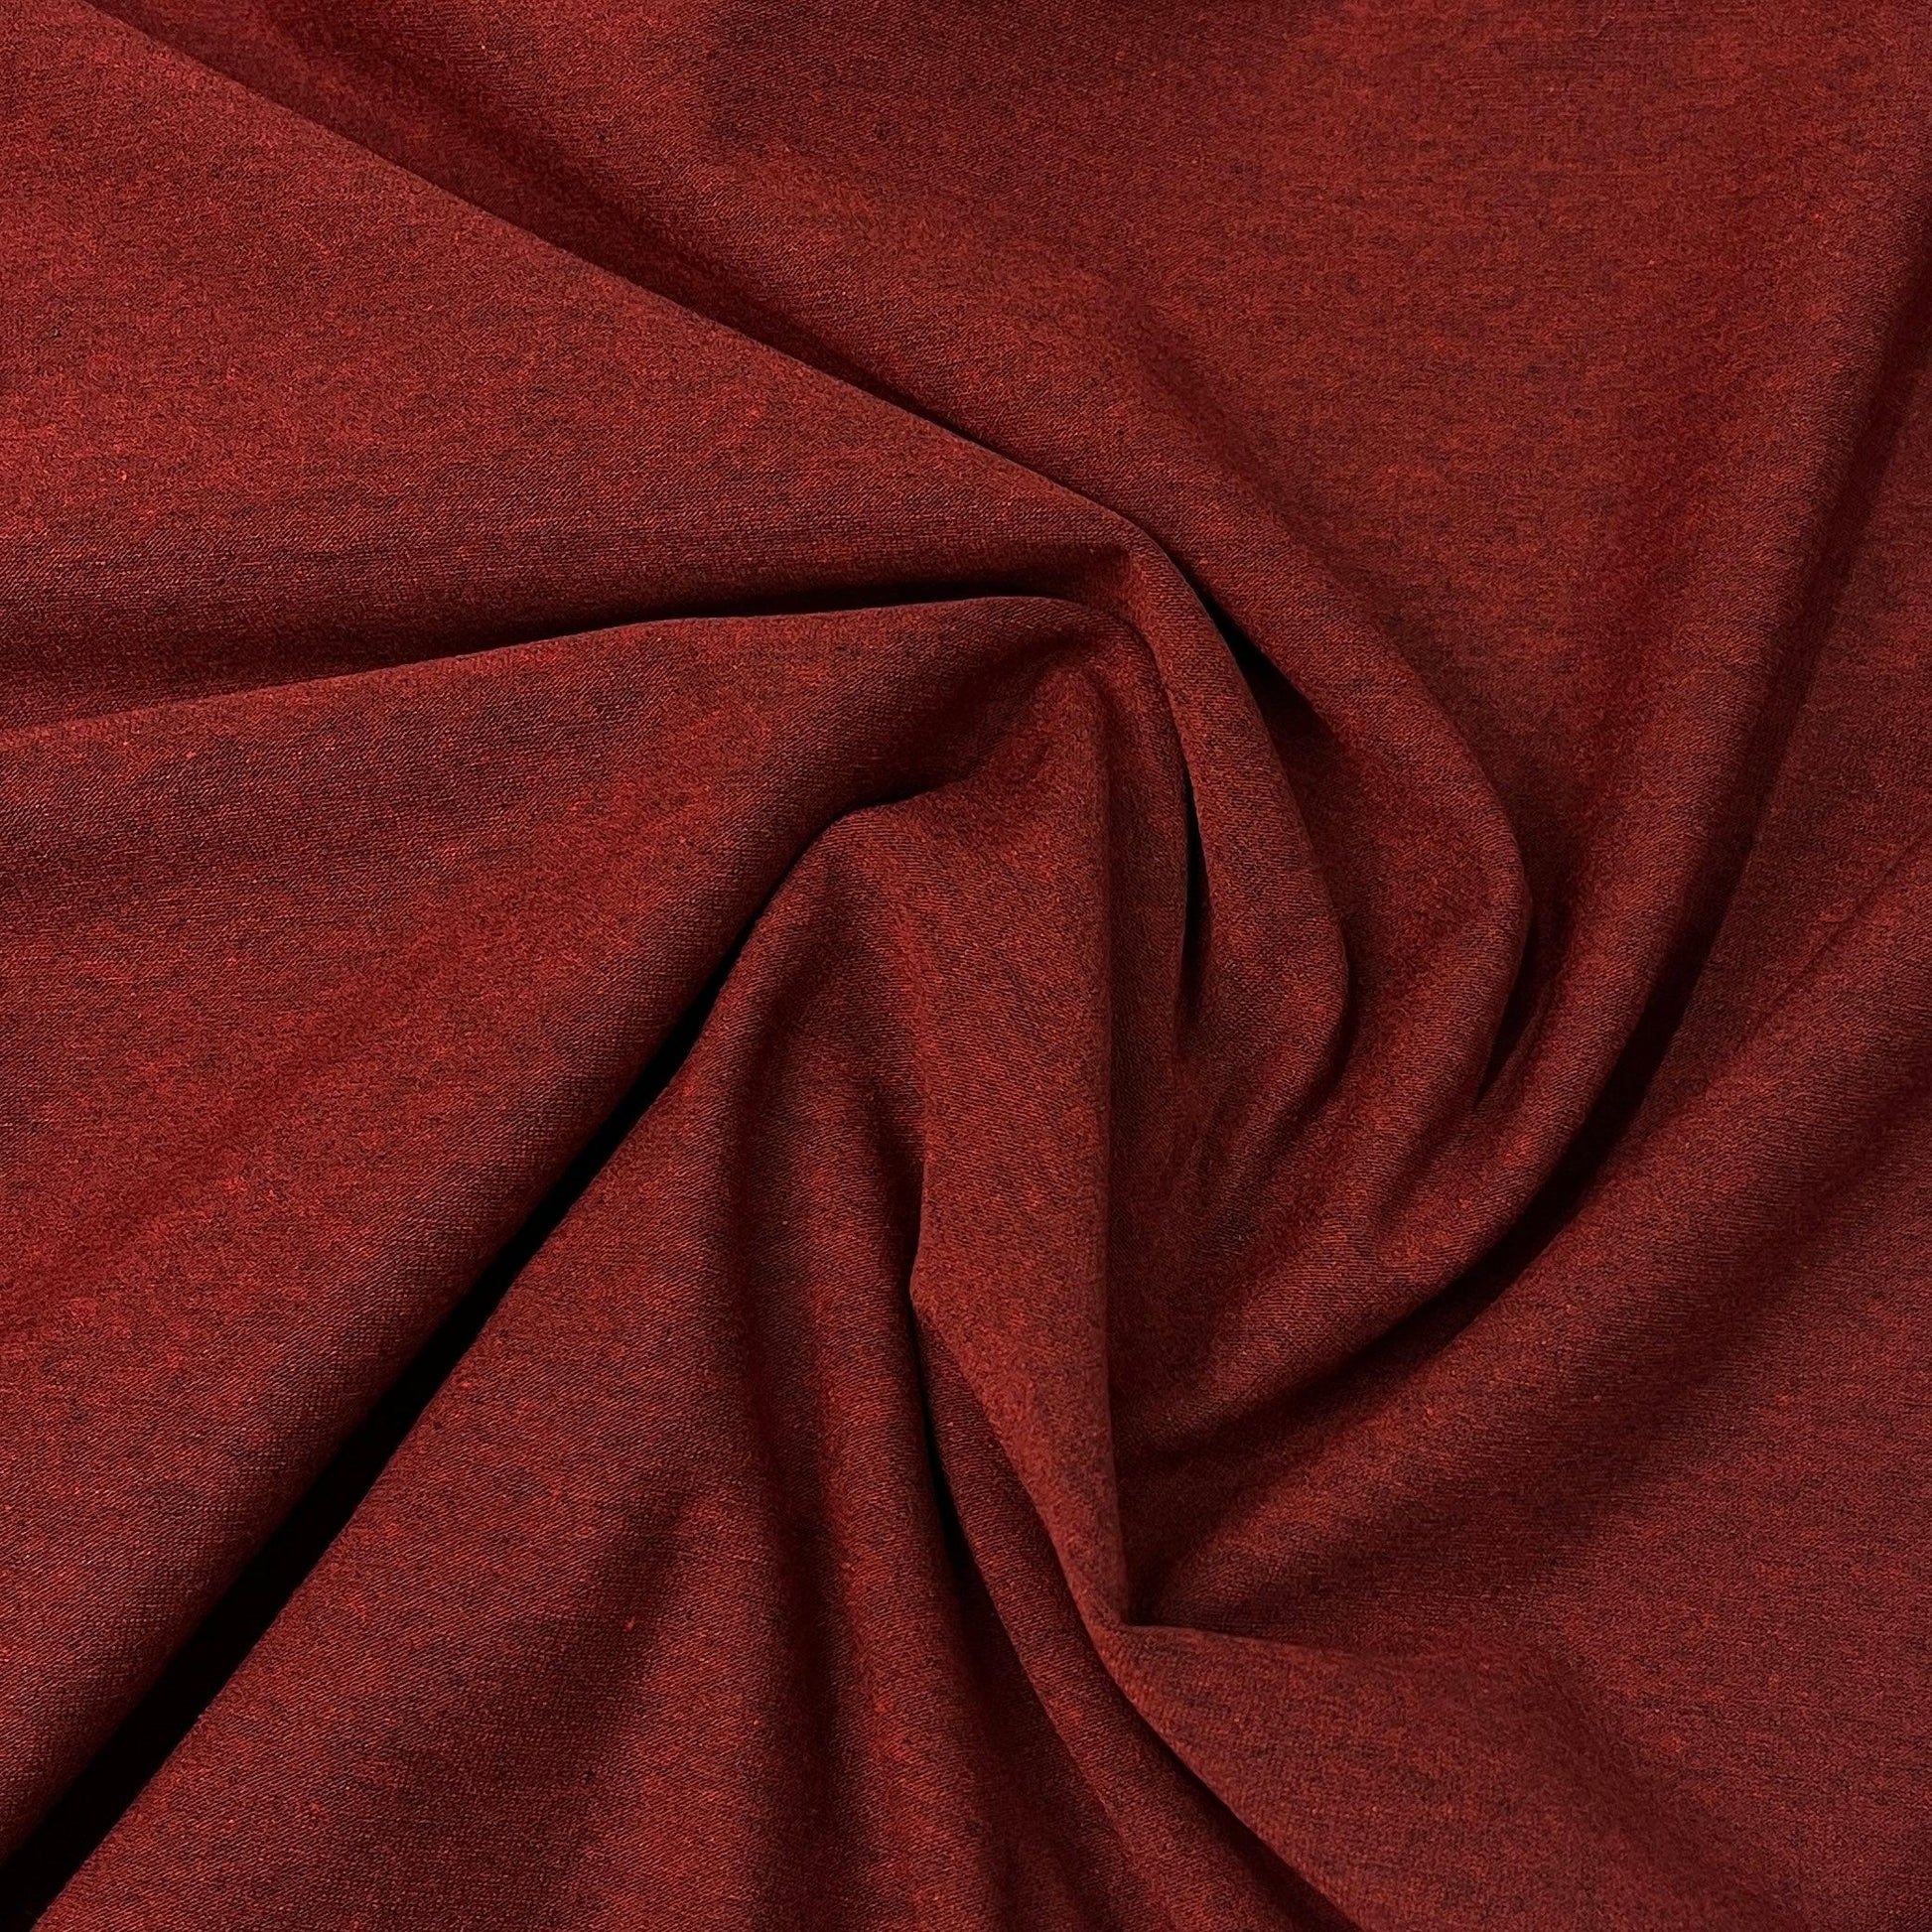 Red Pepper Rayon/Spandex Jersey Fabric - Nature's Fabrics